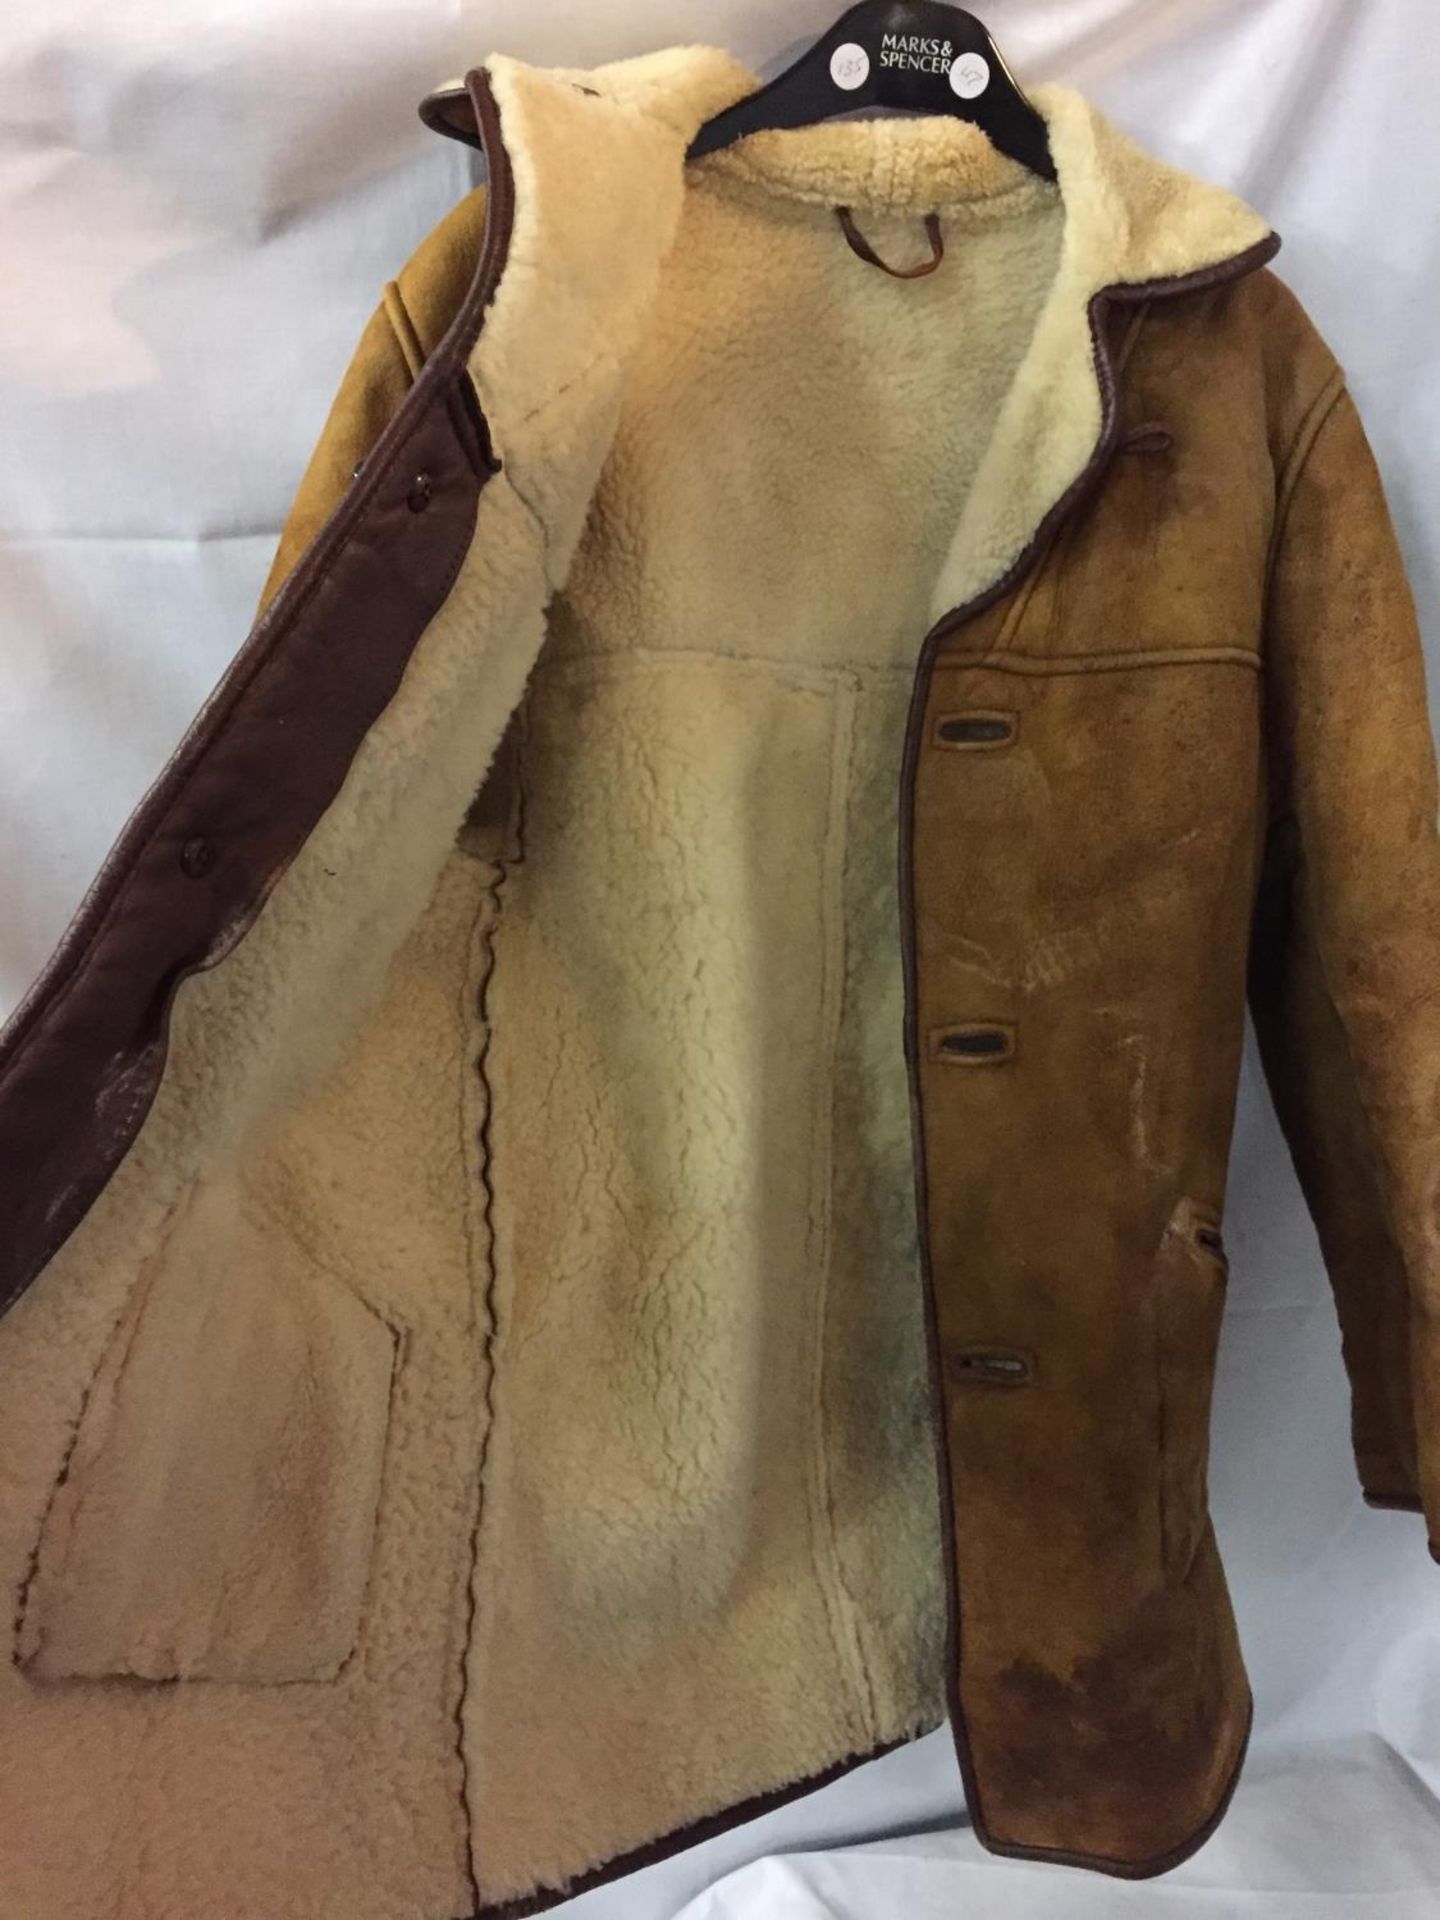 GENT'S SHEEPSKIN COAT, BUTTON FRONT LENGTH 32 INCHES/81CM - Image 2 of 3